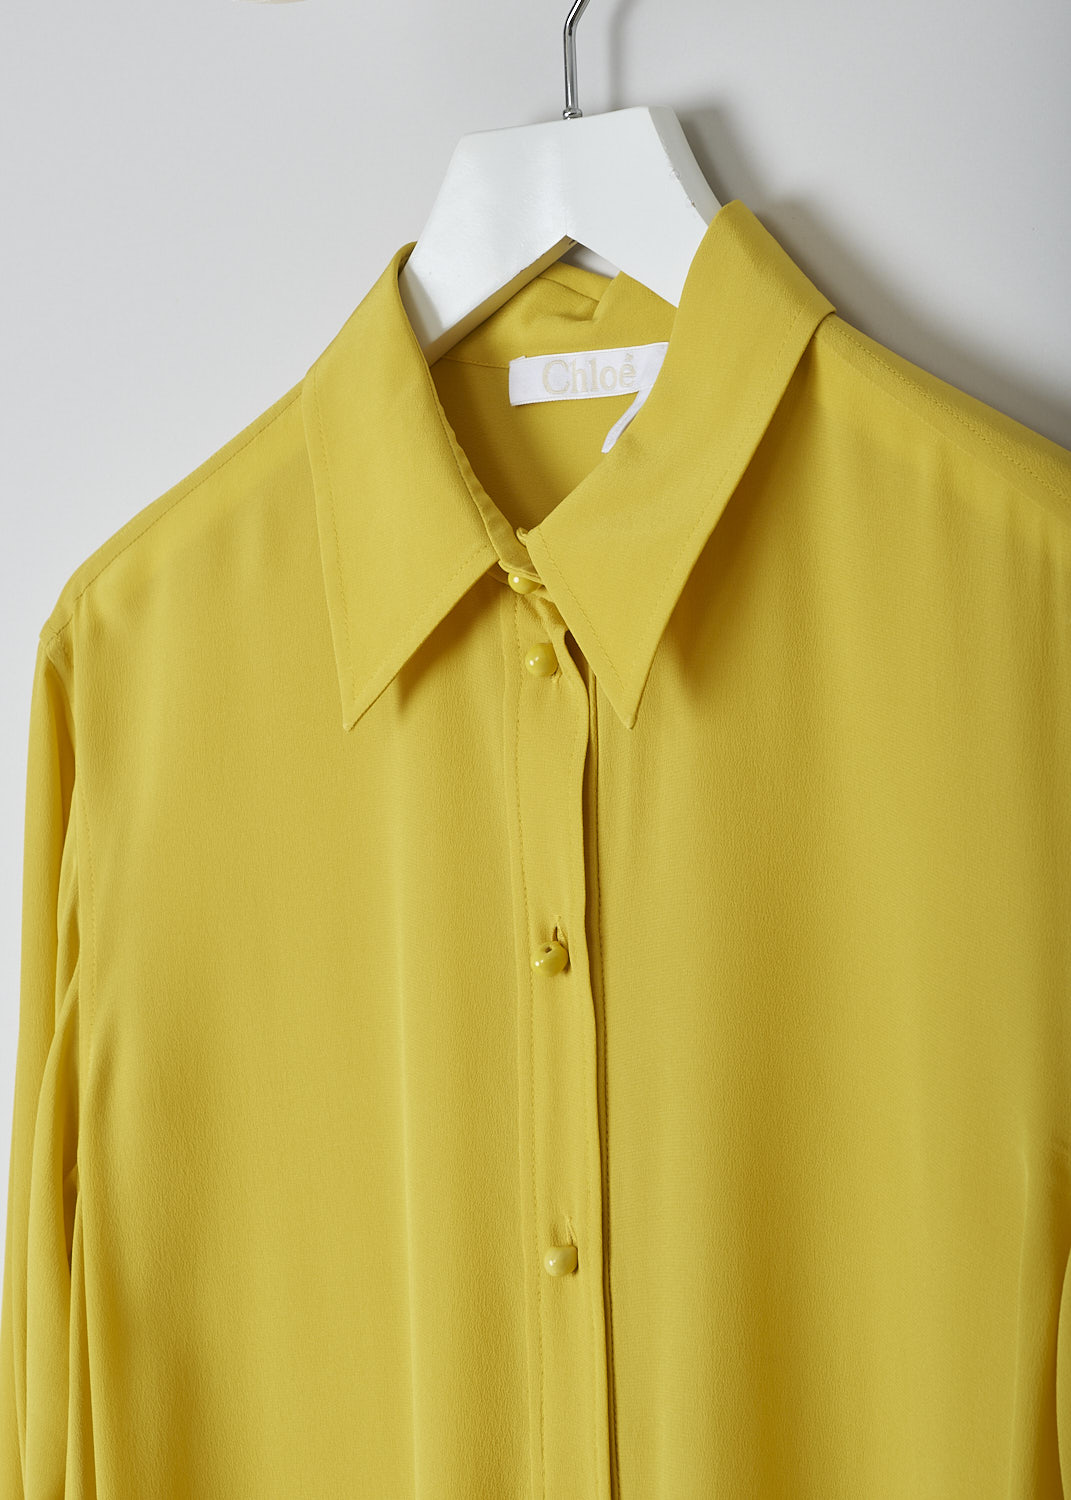 CHLOÃ‰, MUSTARD YELLOW DRESS, CHC22URO64004732_MUSTARD, Yellow, Detail, This mustard yellow shirt dress has a spread collar and a front button placket with ceramic buttons that reaches about halfway down. The long sleeves have cuffs with those same ceramic buttons. Slanted pockets are concealed in the side seam. The dress has a straight hemline with side slits. In the back, the dress has a centre box pleat. 
 
